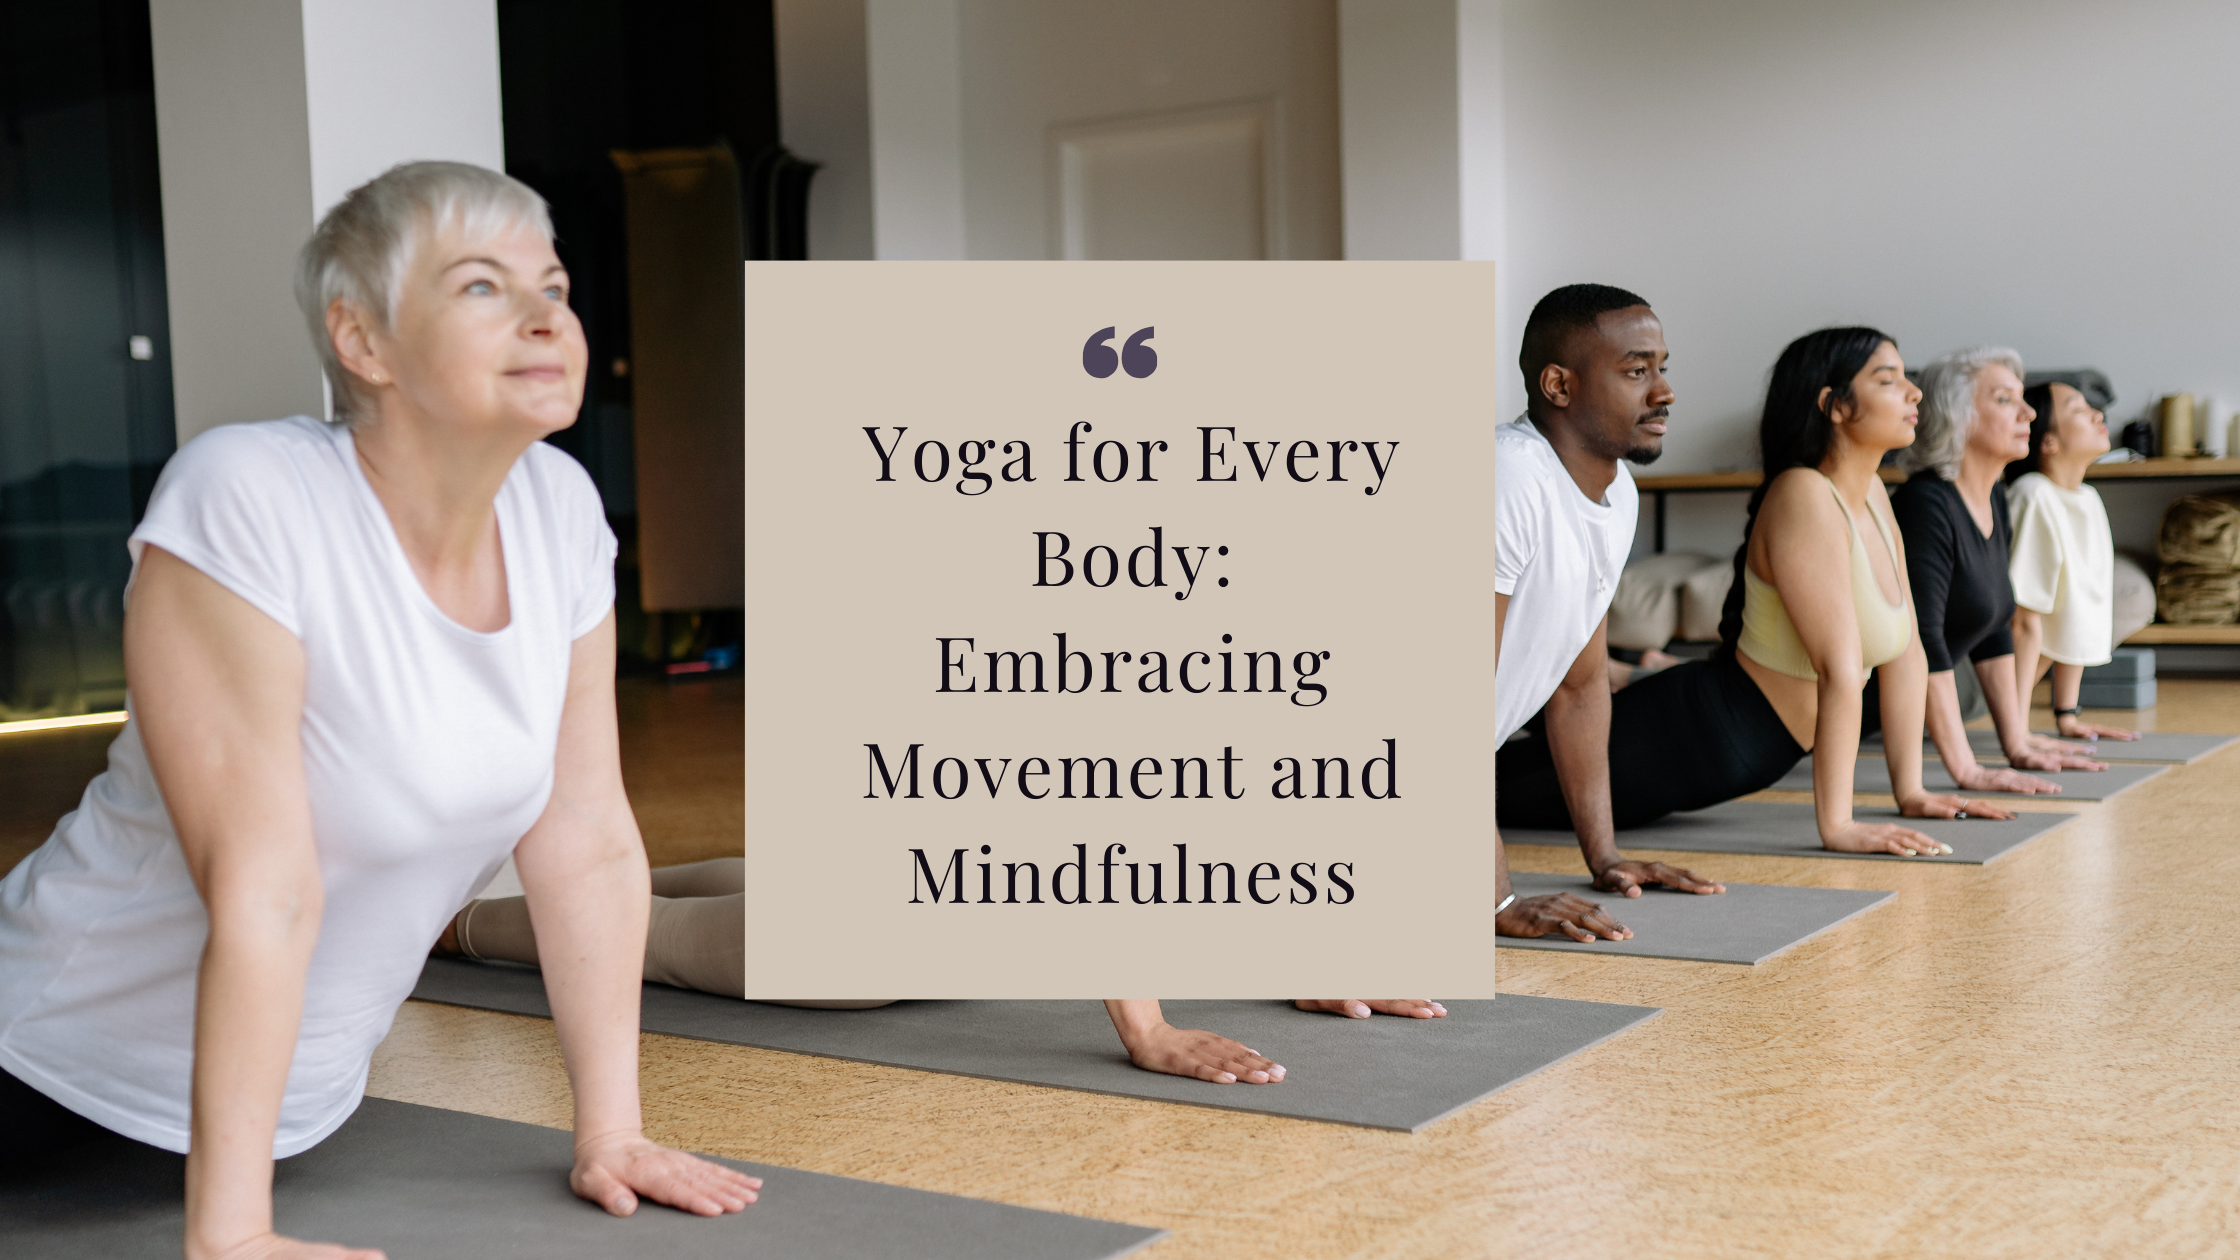 Yoga for Every Body: Embracing Movement and Mindfulness